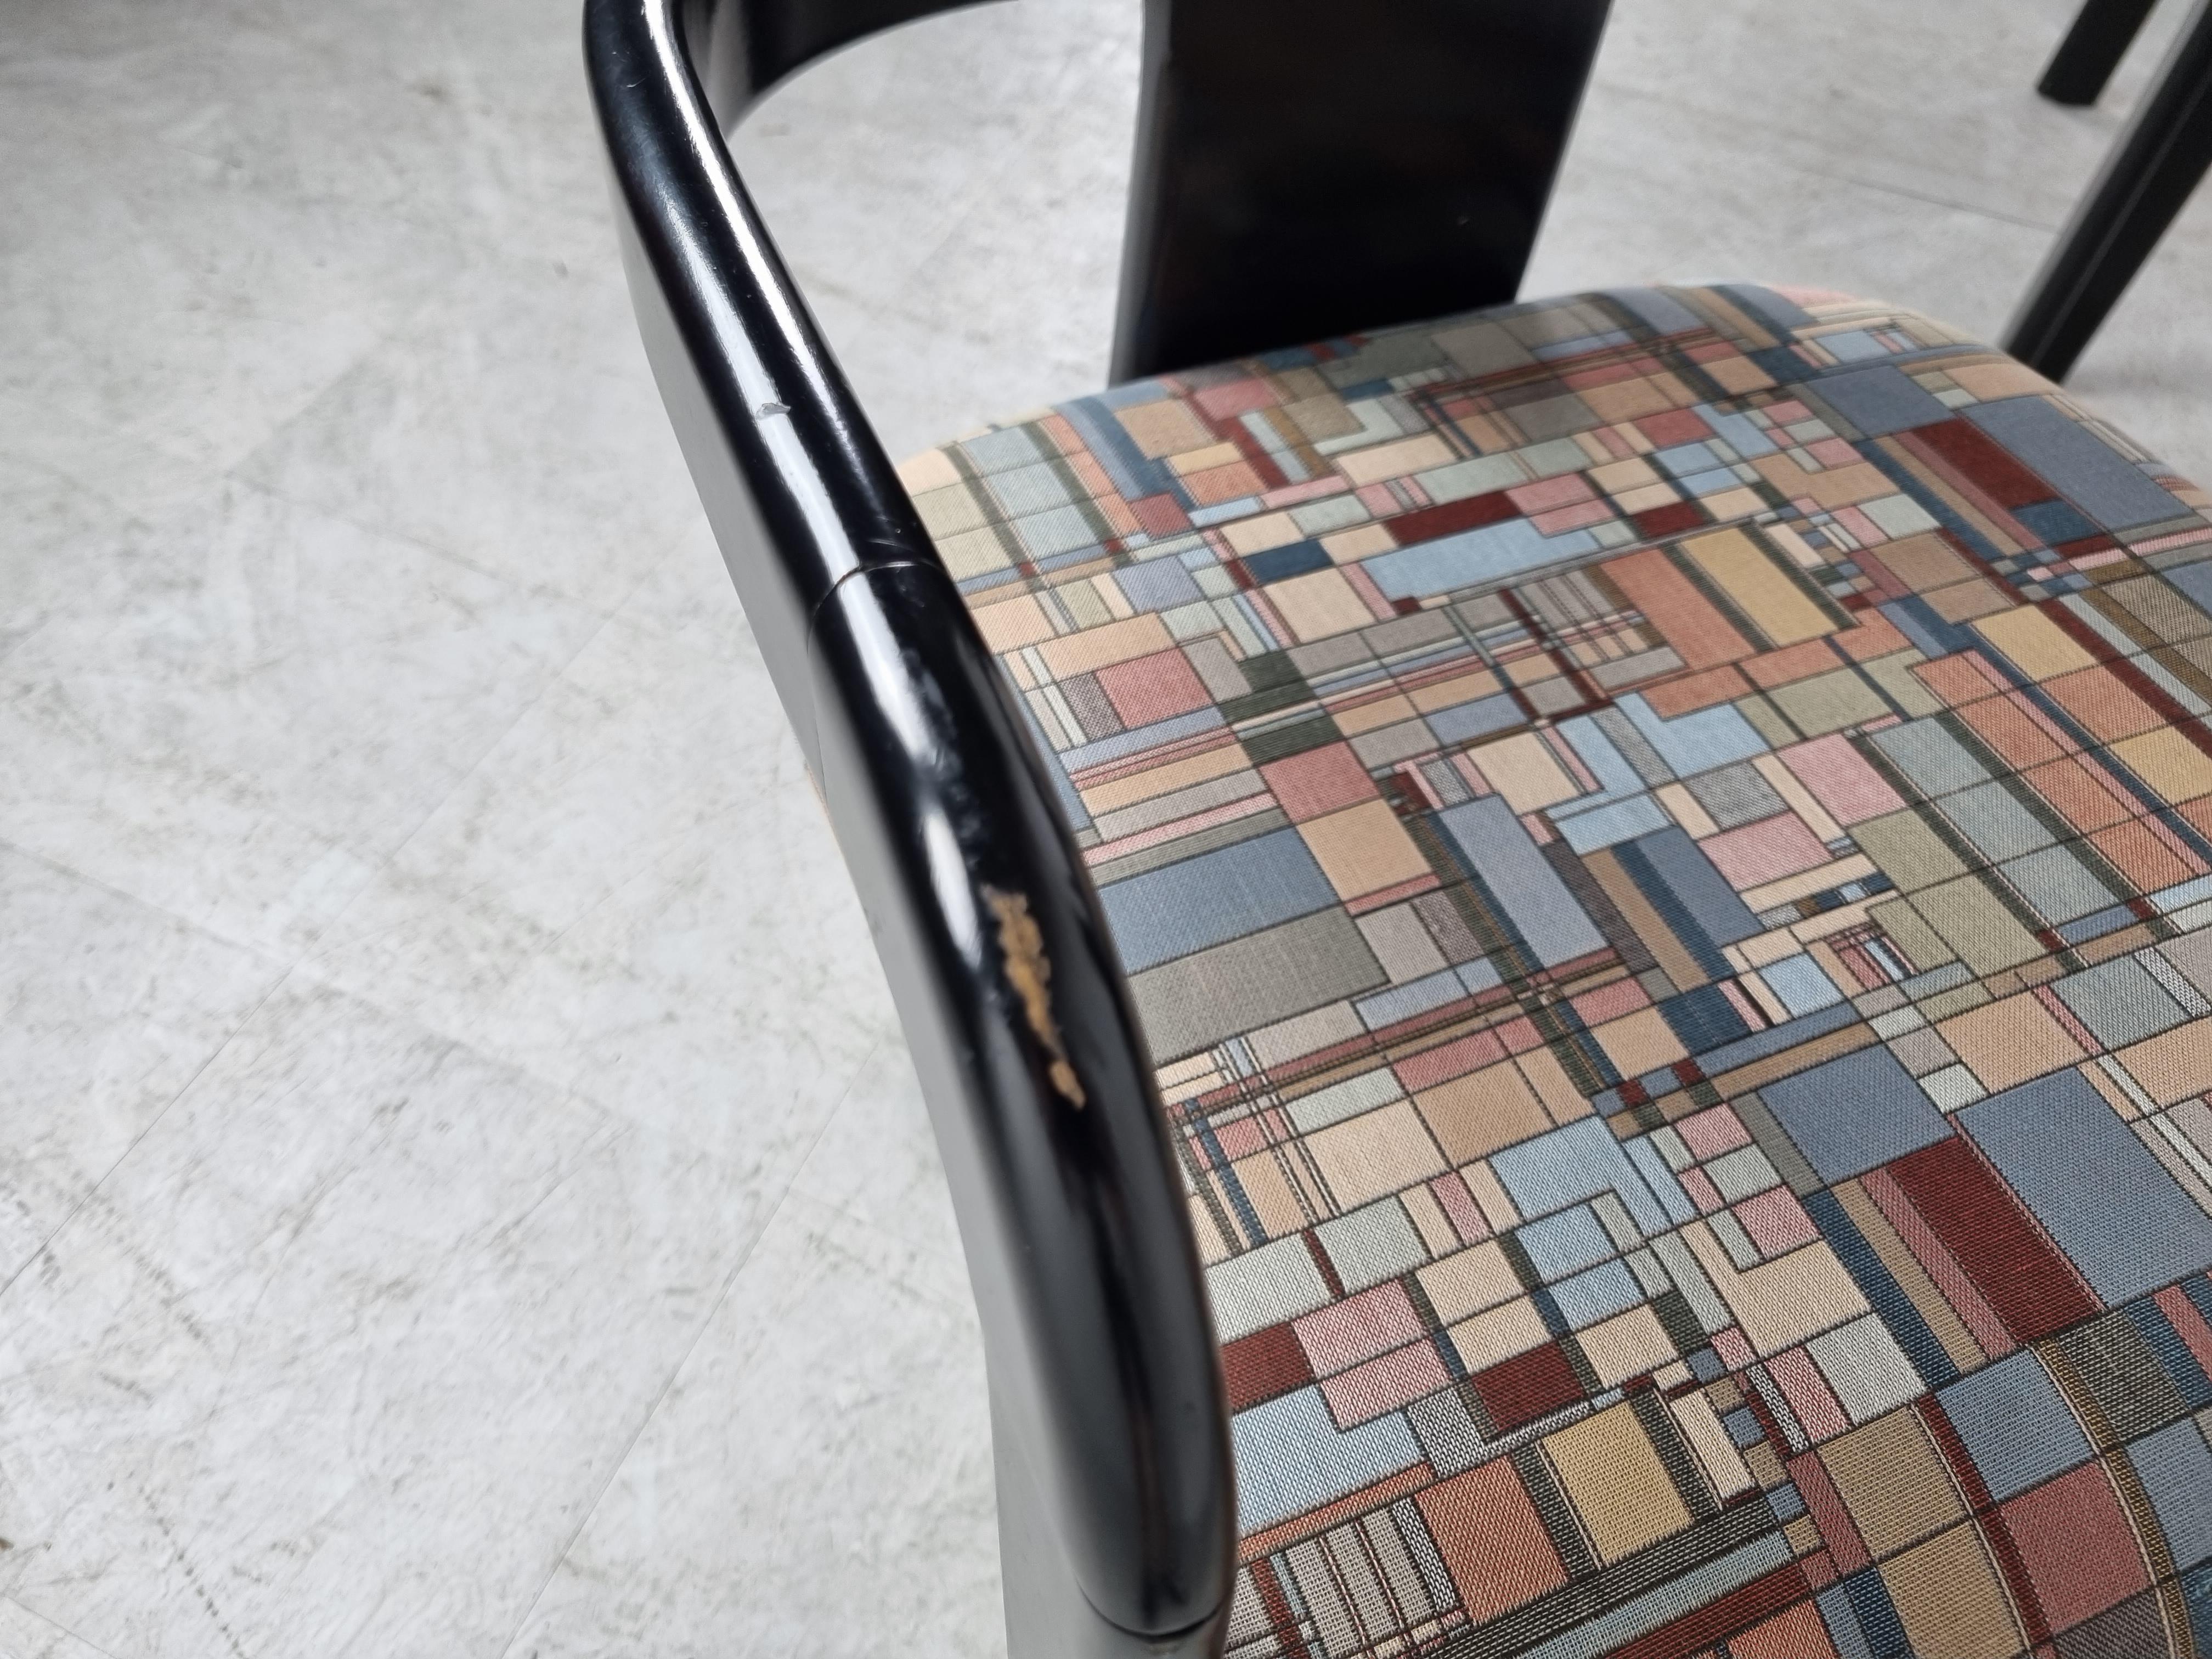 Postmodern tripod dining chairs made from a black lacquered wooden frame and a colourful gemotric fabric upholstery.

Attractive design with original fabric in very good condition.

The frames have some light wear on the armrests but still look